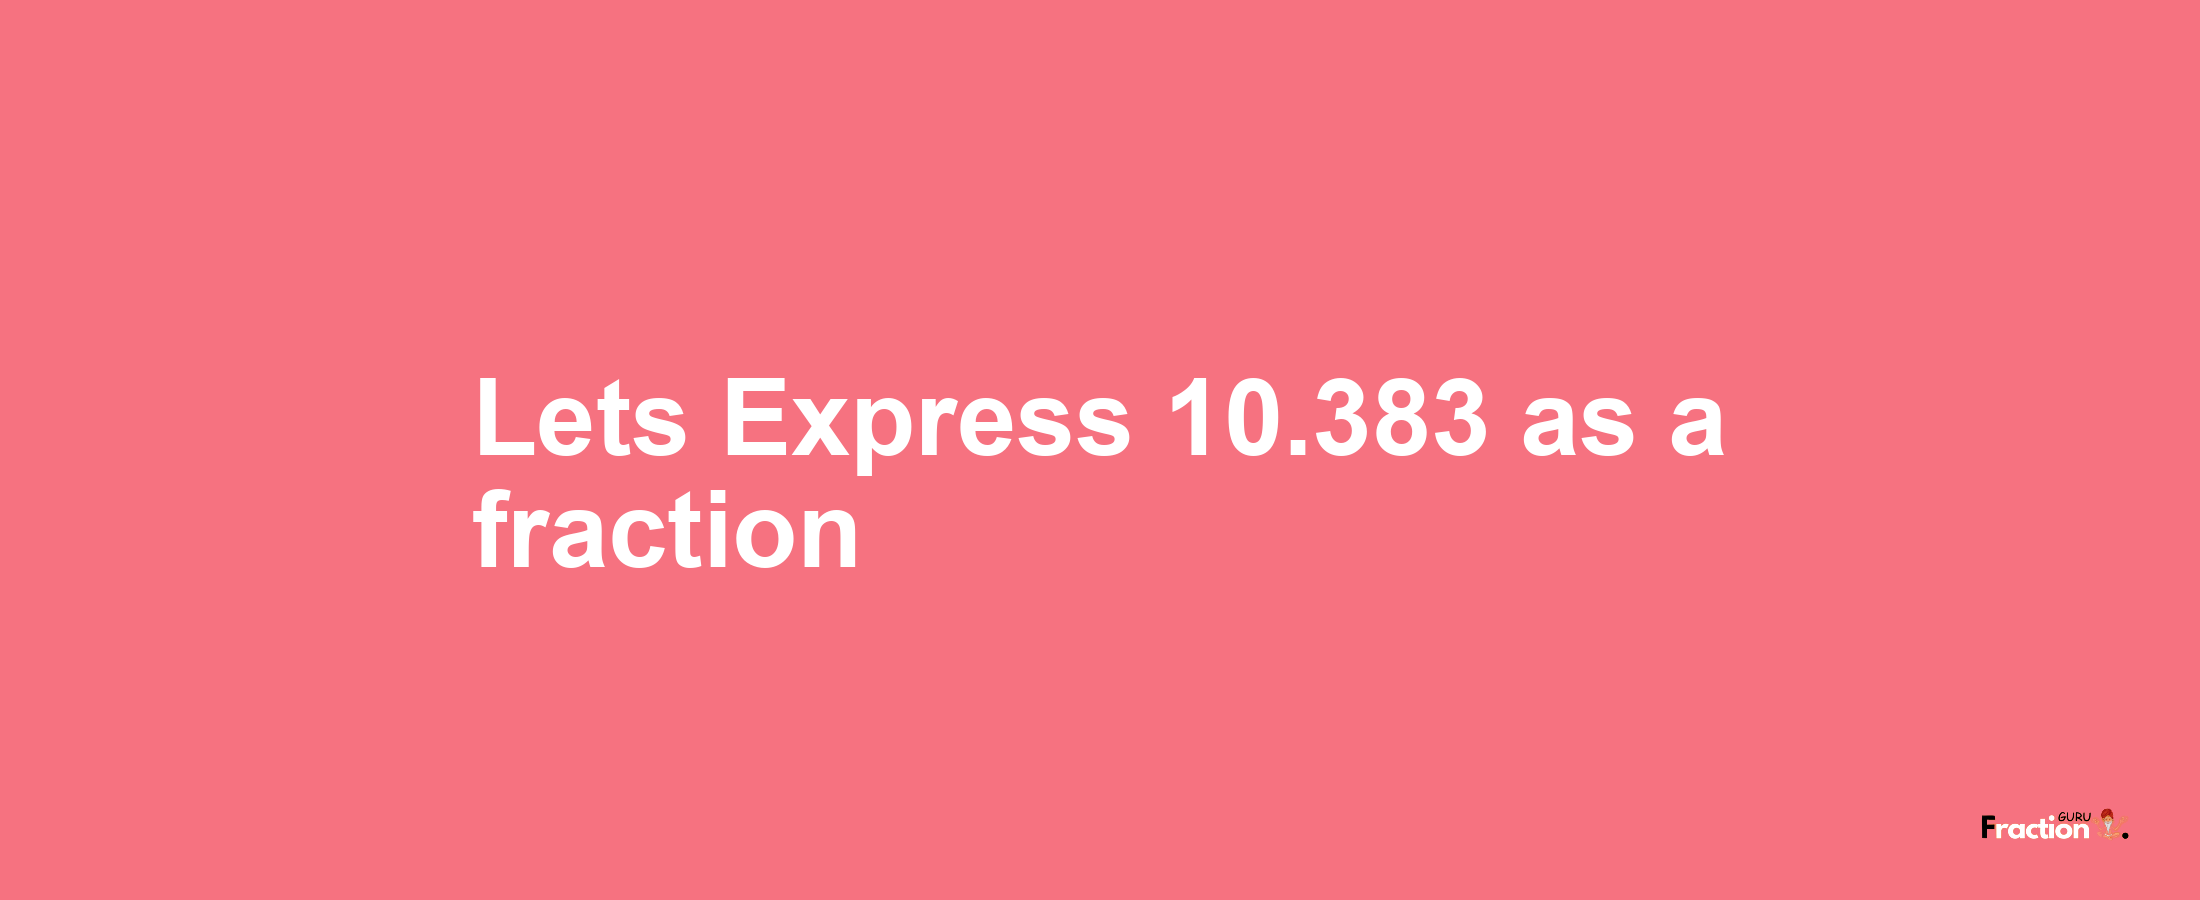 Lets Express 10.383 as afraction